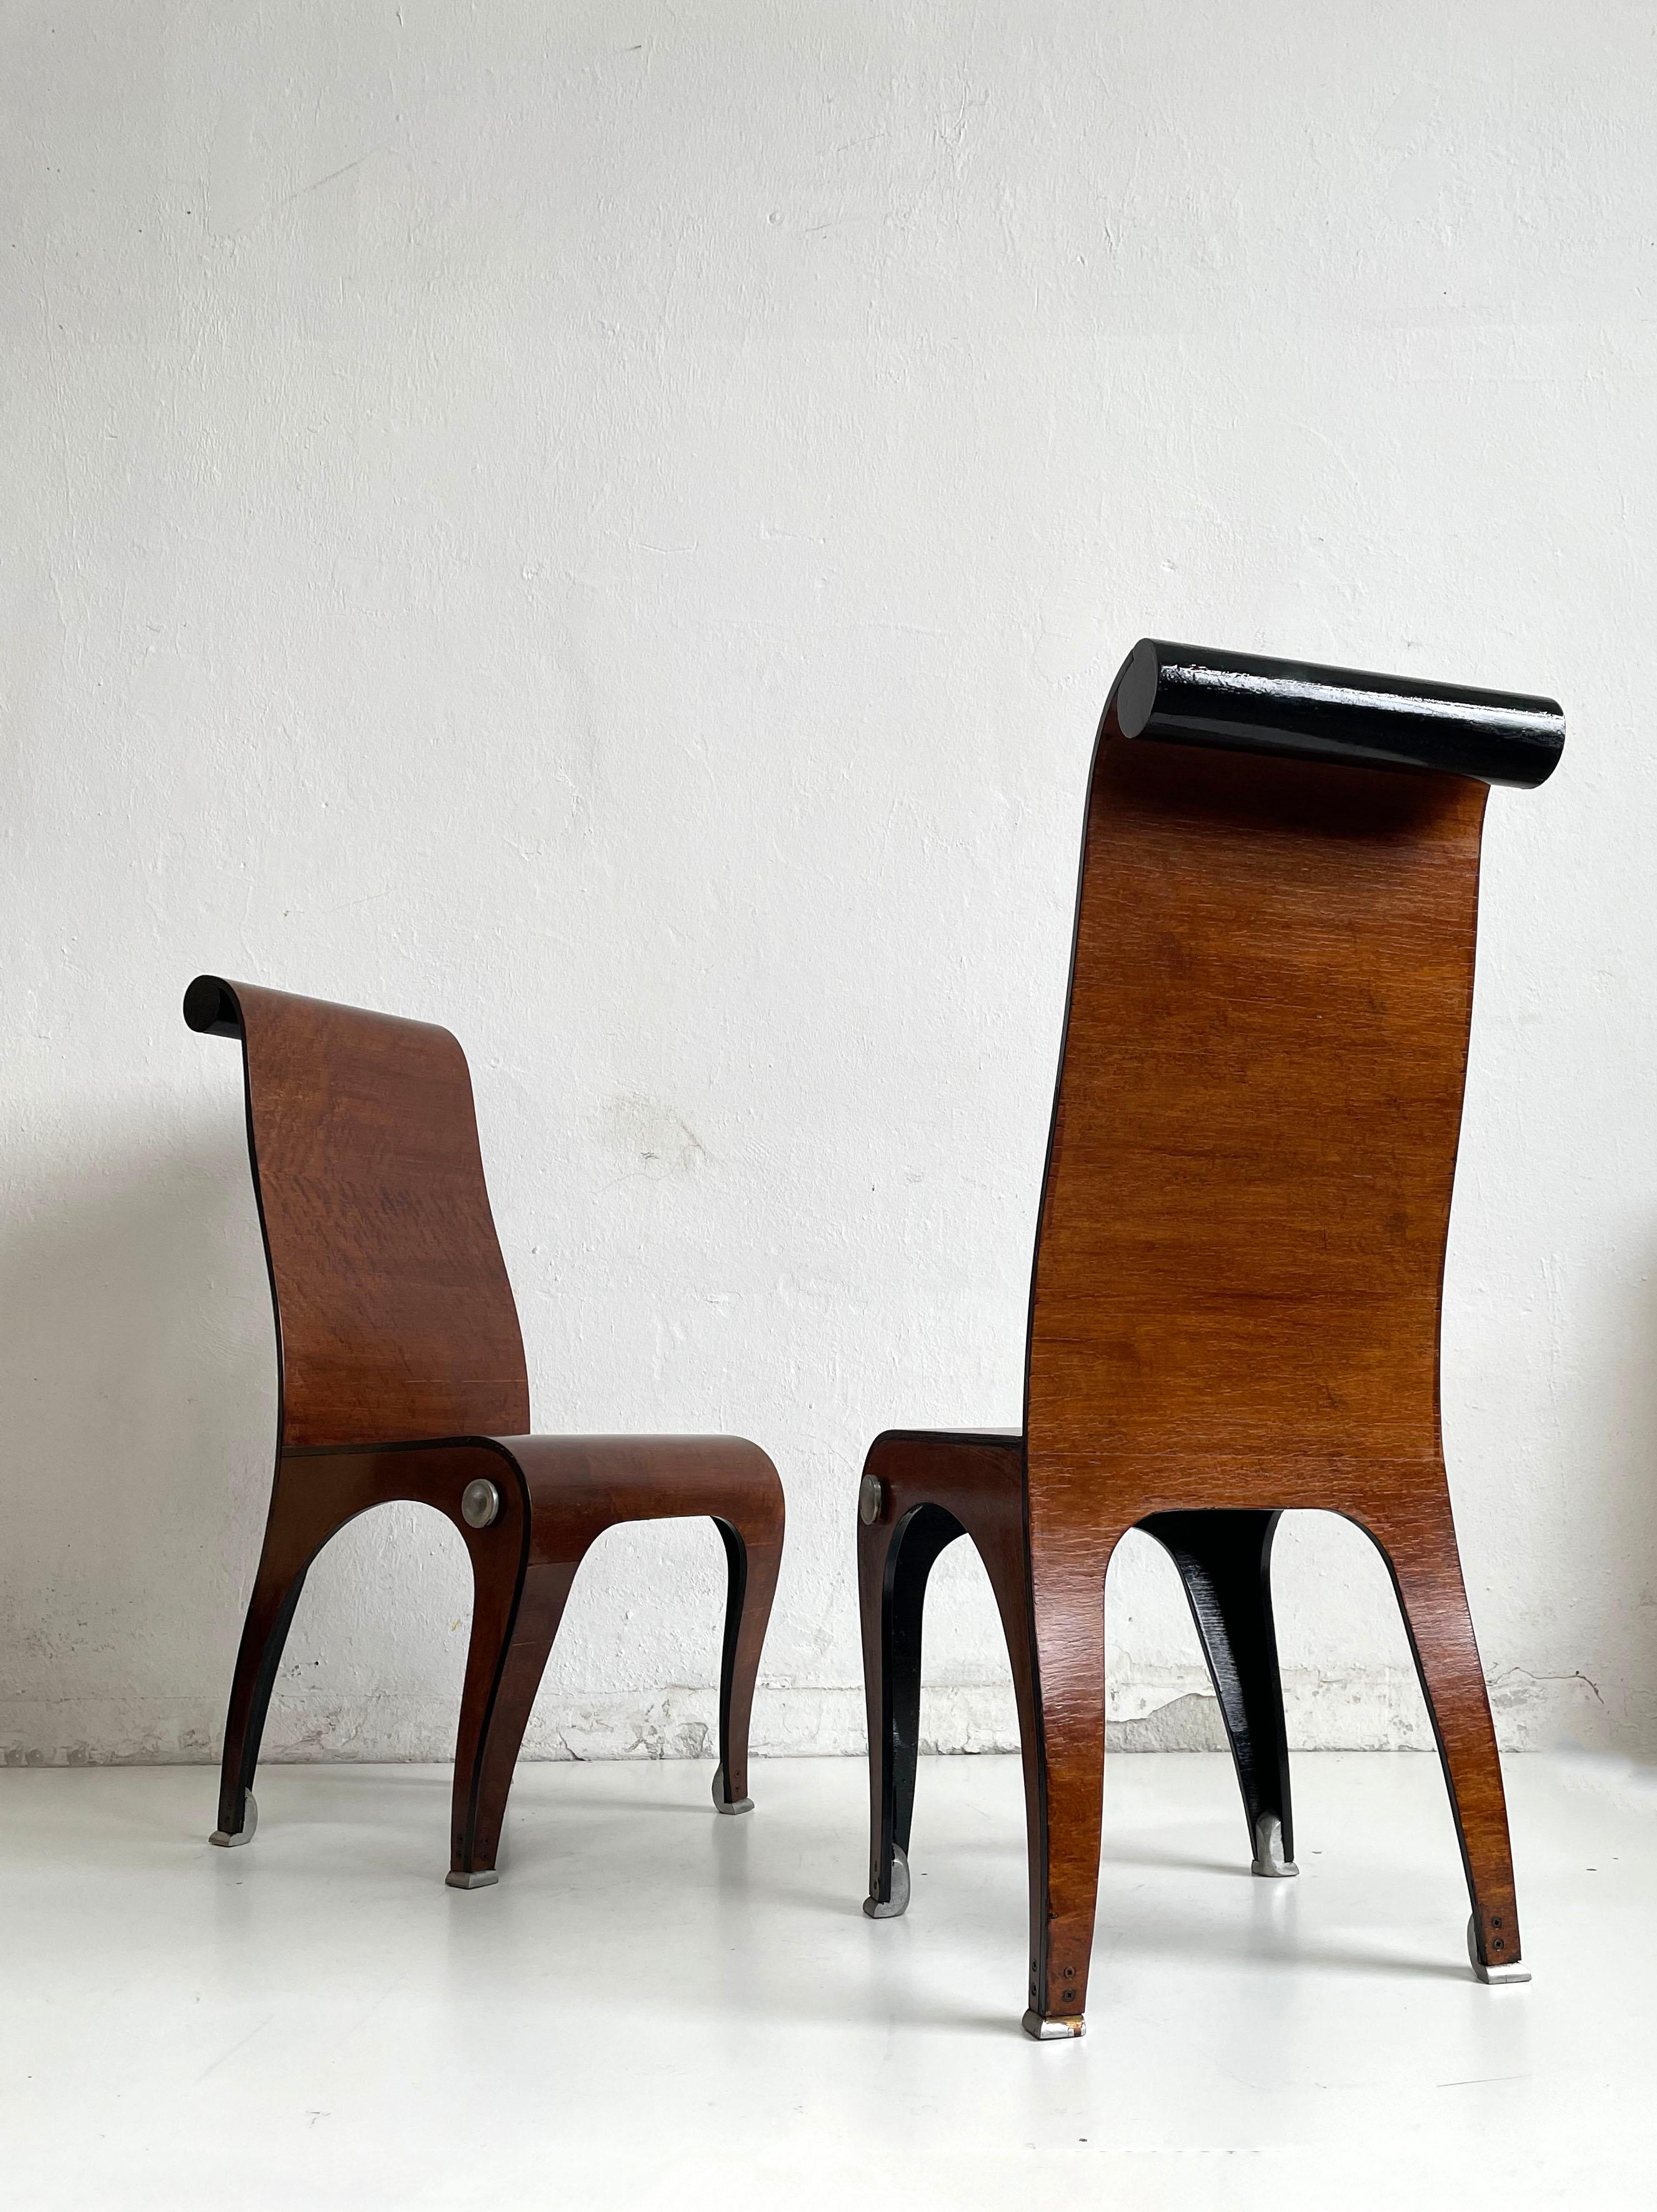 Very unusual pair of moulded curved plywood chairs with cast aluminium details, veneered in burr walnut and finished with shellac. Some details are painted in black.

2 sets, each consisting of 2 chairs, are available for sale. The price is per